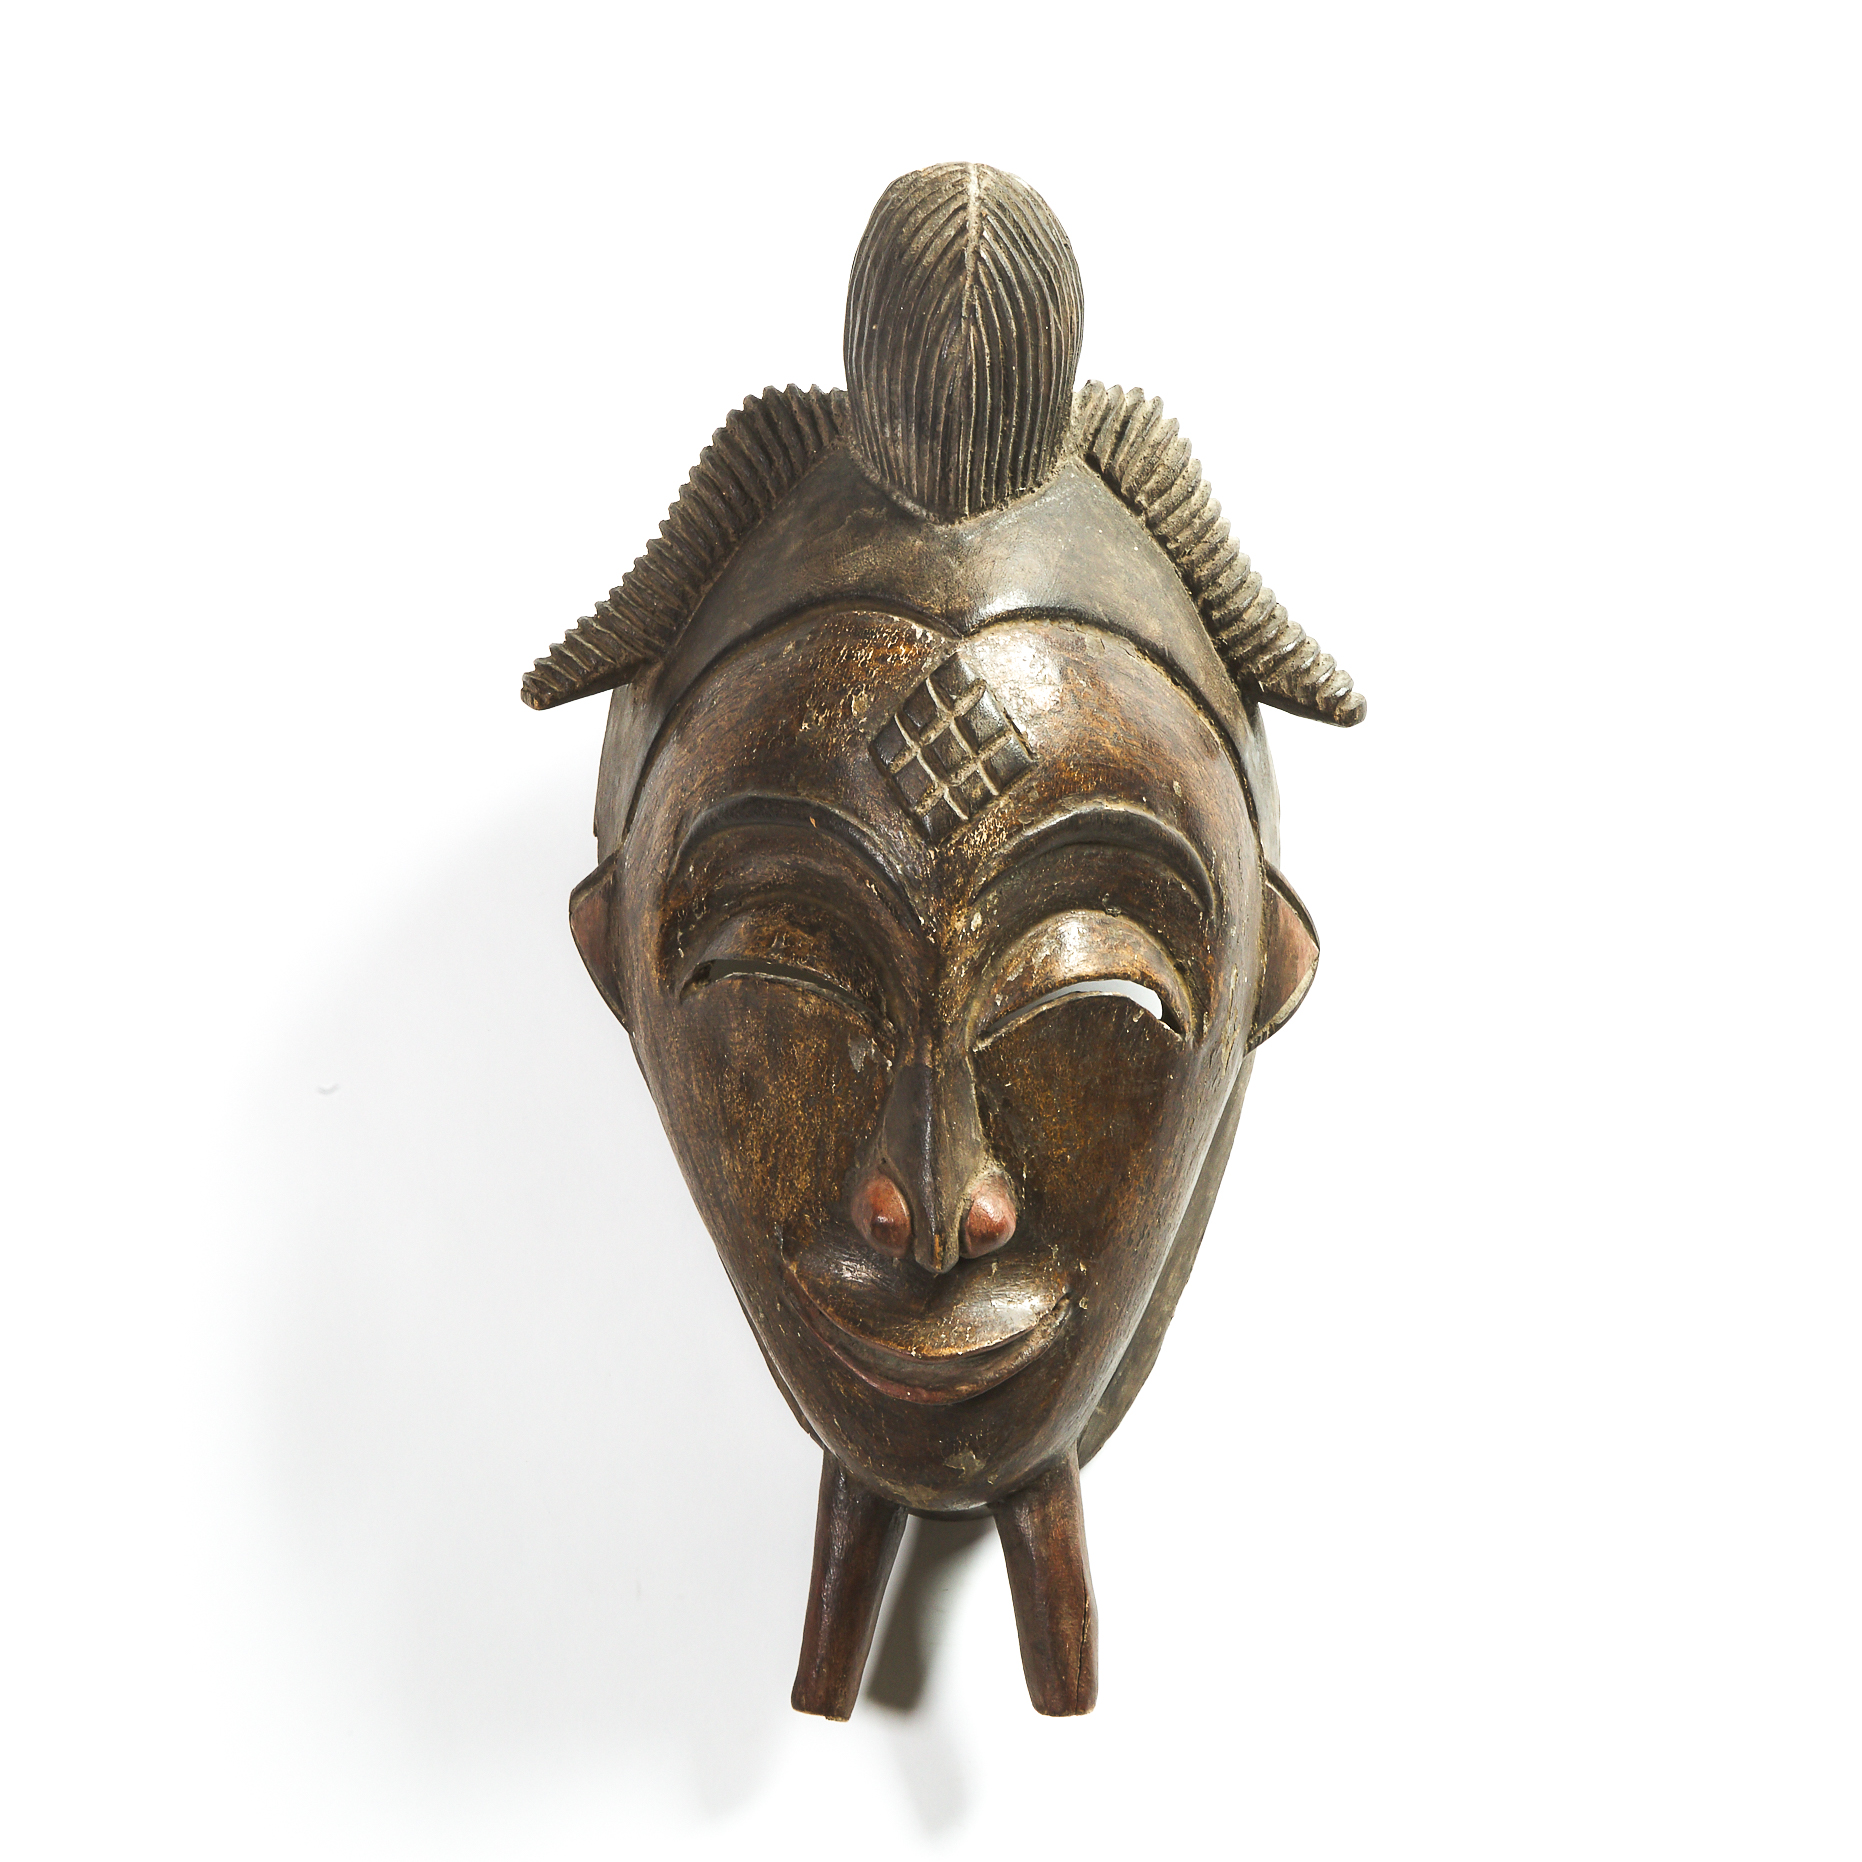 Baule Mask, Ivory Coast, West Africa, mid to late 20th century